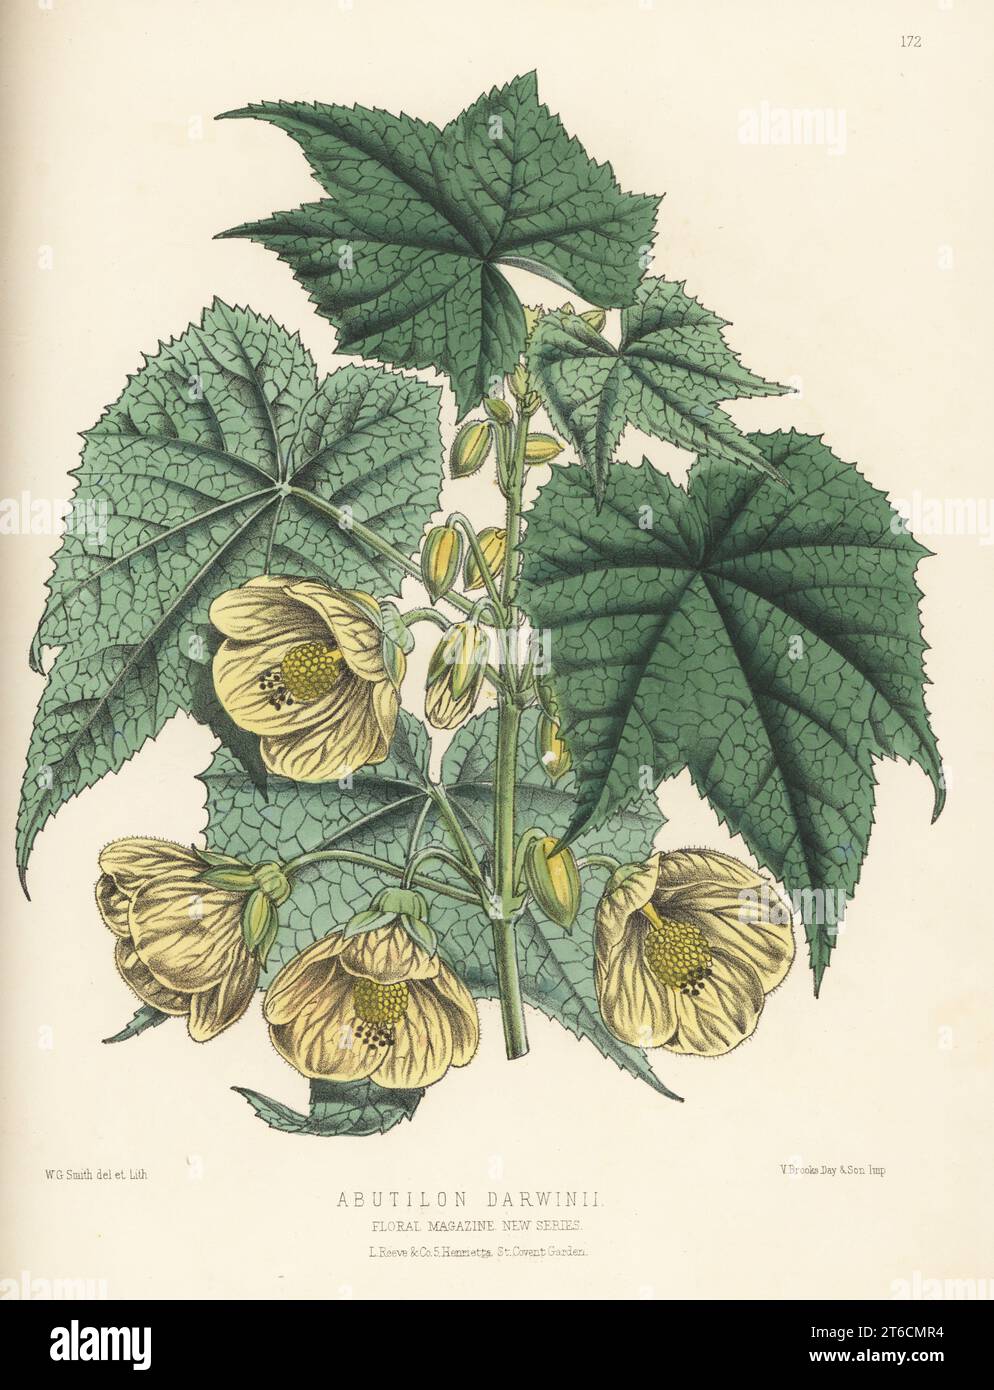 Callianthe darwinii, popular ornamental hothouse plant native to Brazil. Raised by James Herbert Veitch and Sons, of Chelsea. As Abutilon darwinii. Handcolored botanical illustration drawn and lithographed by Worthington George Smith from Henry Honywood Dombrain's Floral Magazine, New Series, Volume 3, L. Reeve, London, 1874. Lithograph printed by Vincent Brooks, Day & Son. Stock Photo